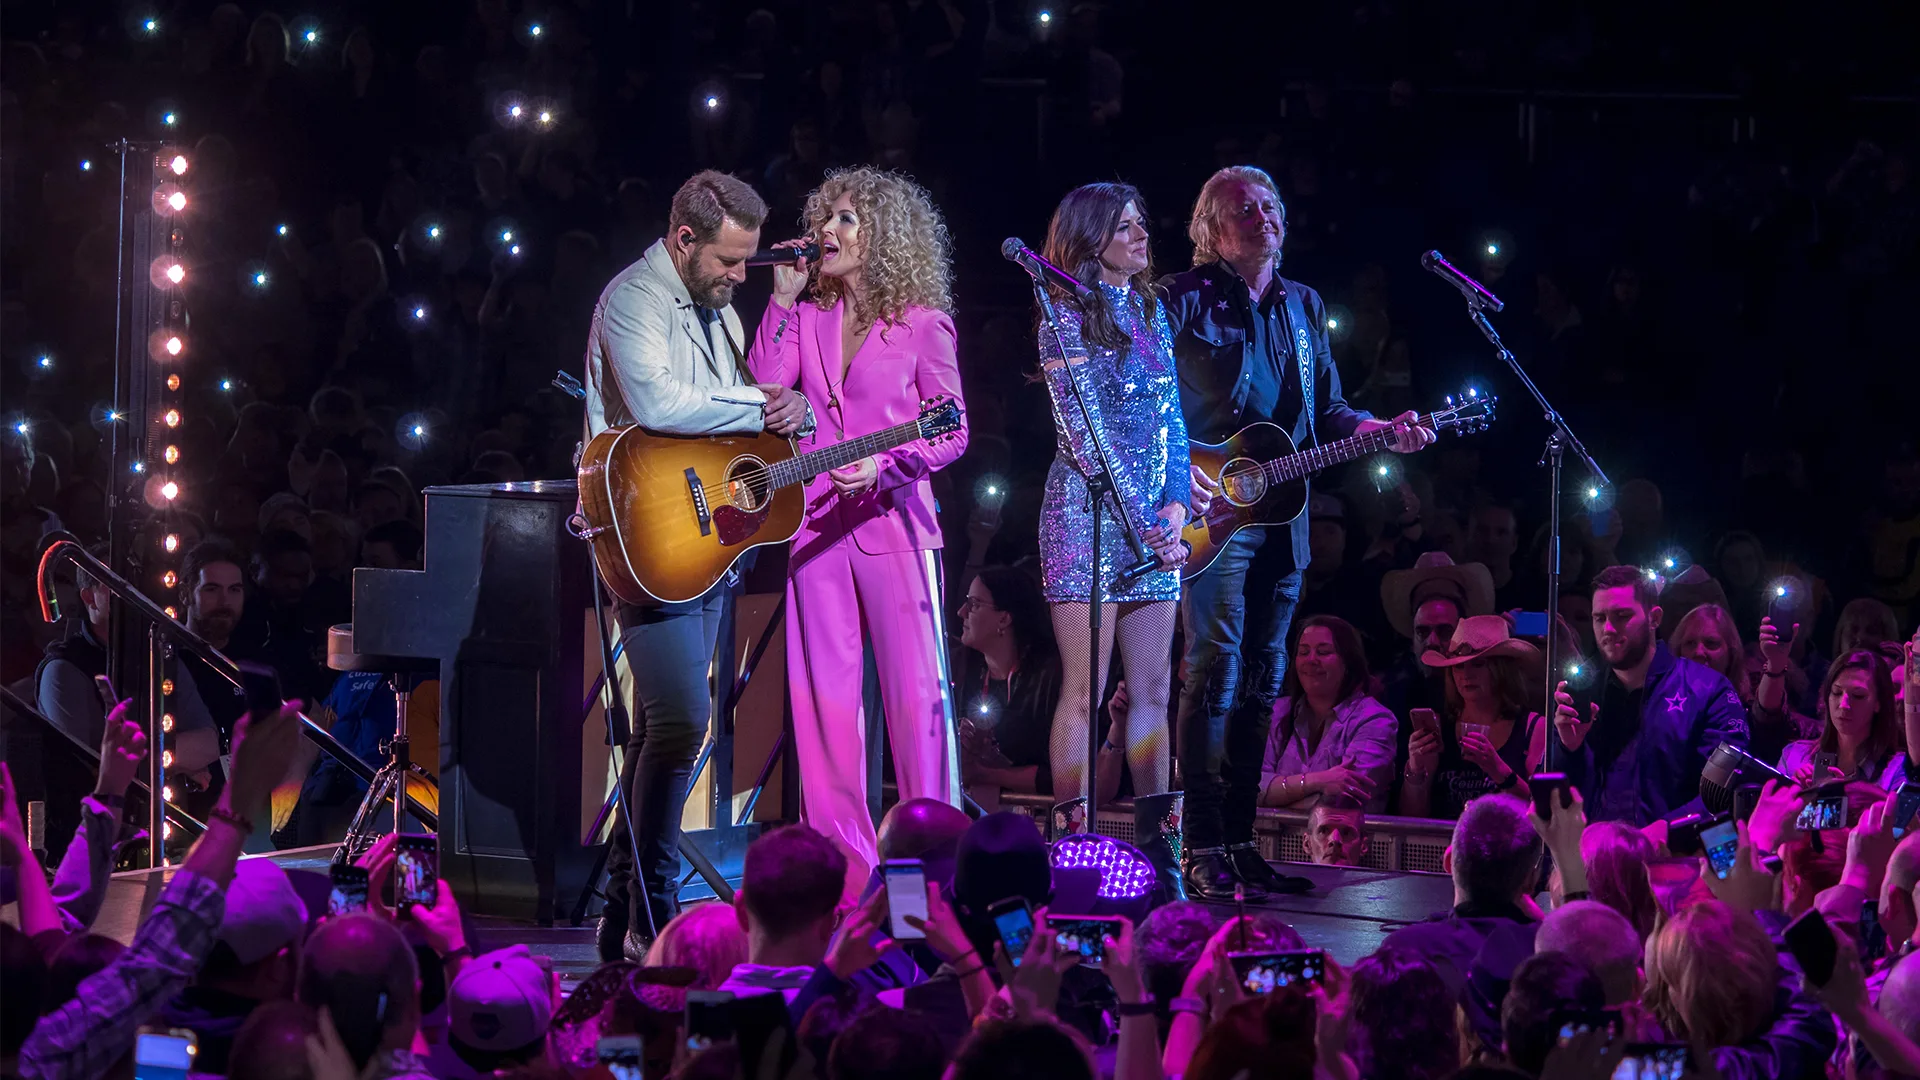 The band Little Big Town perform on a stage to a crowd